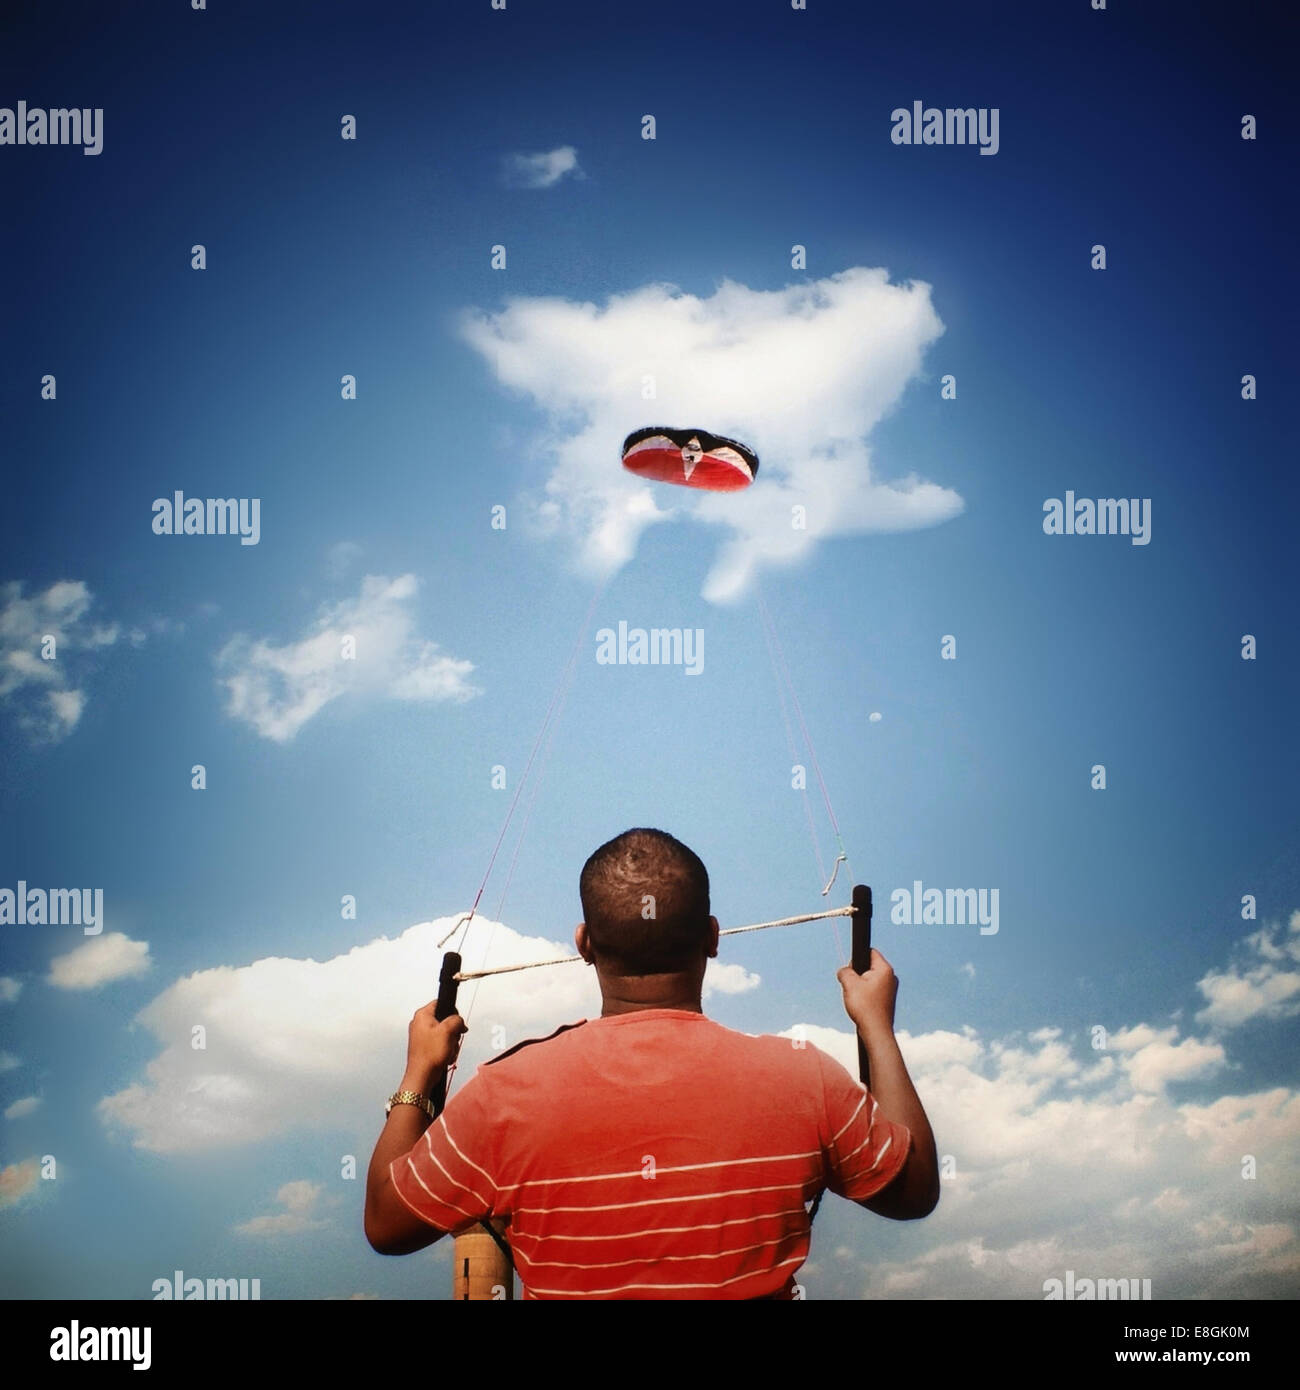 Rear view of a man flying a kite Stock Photo